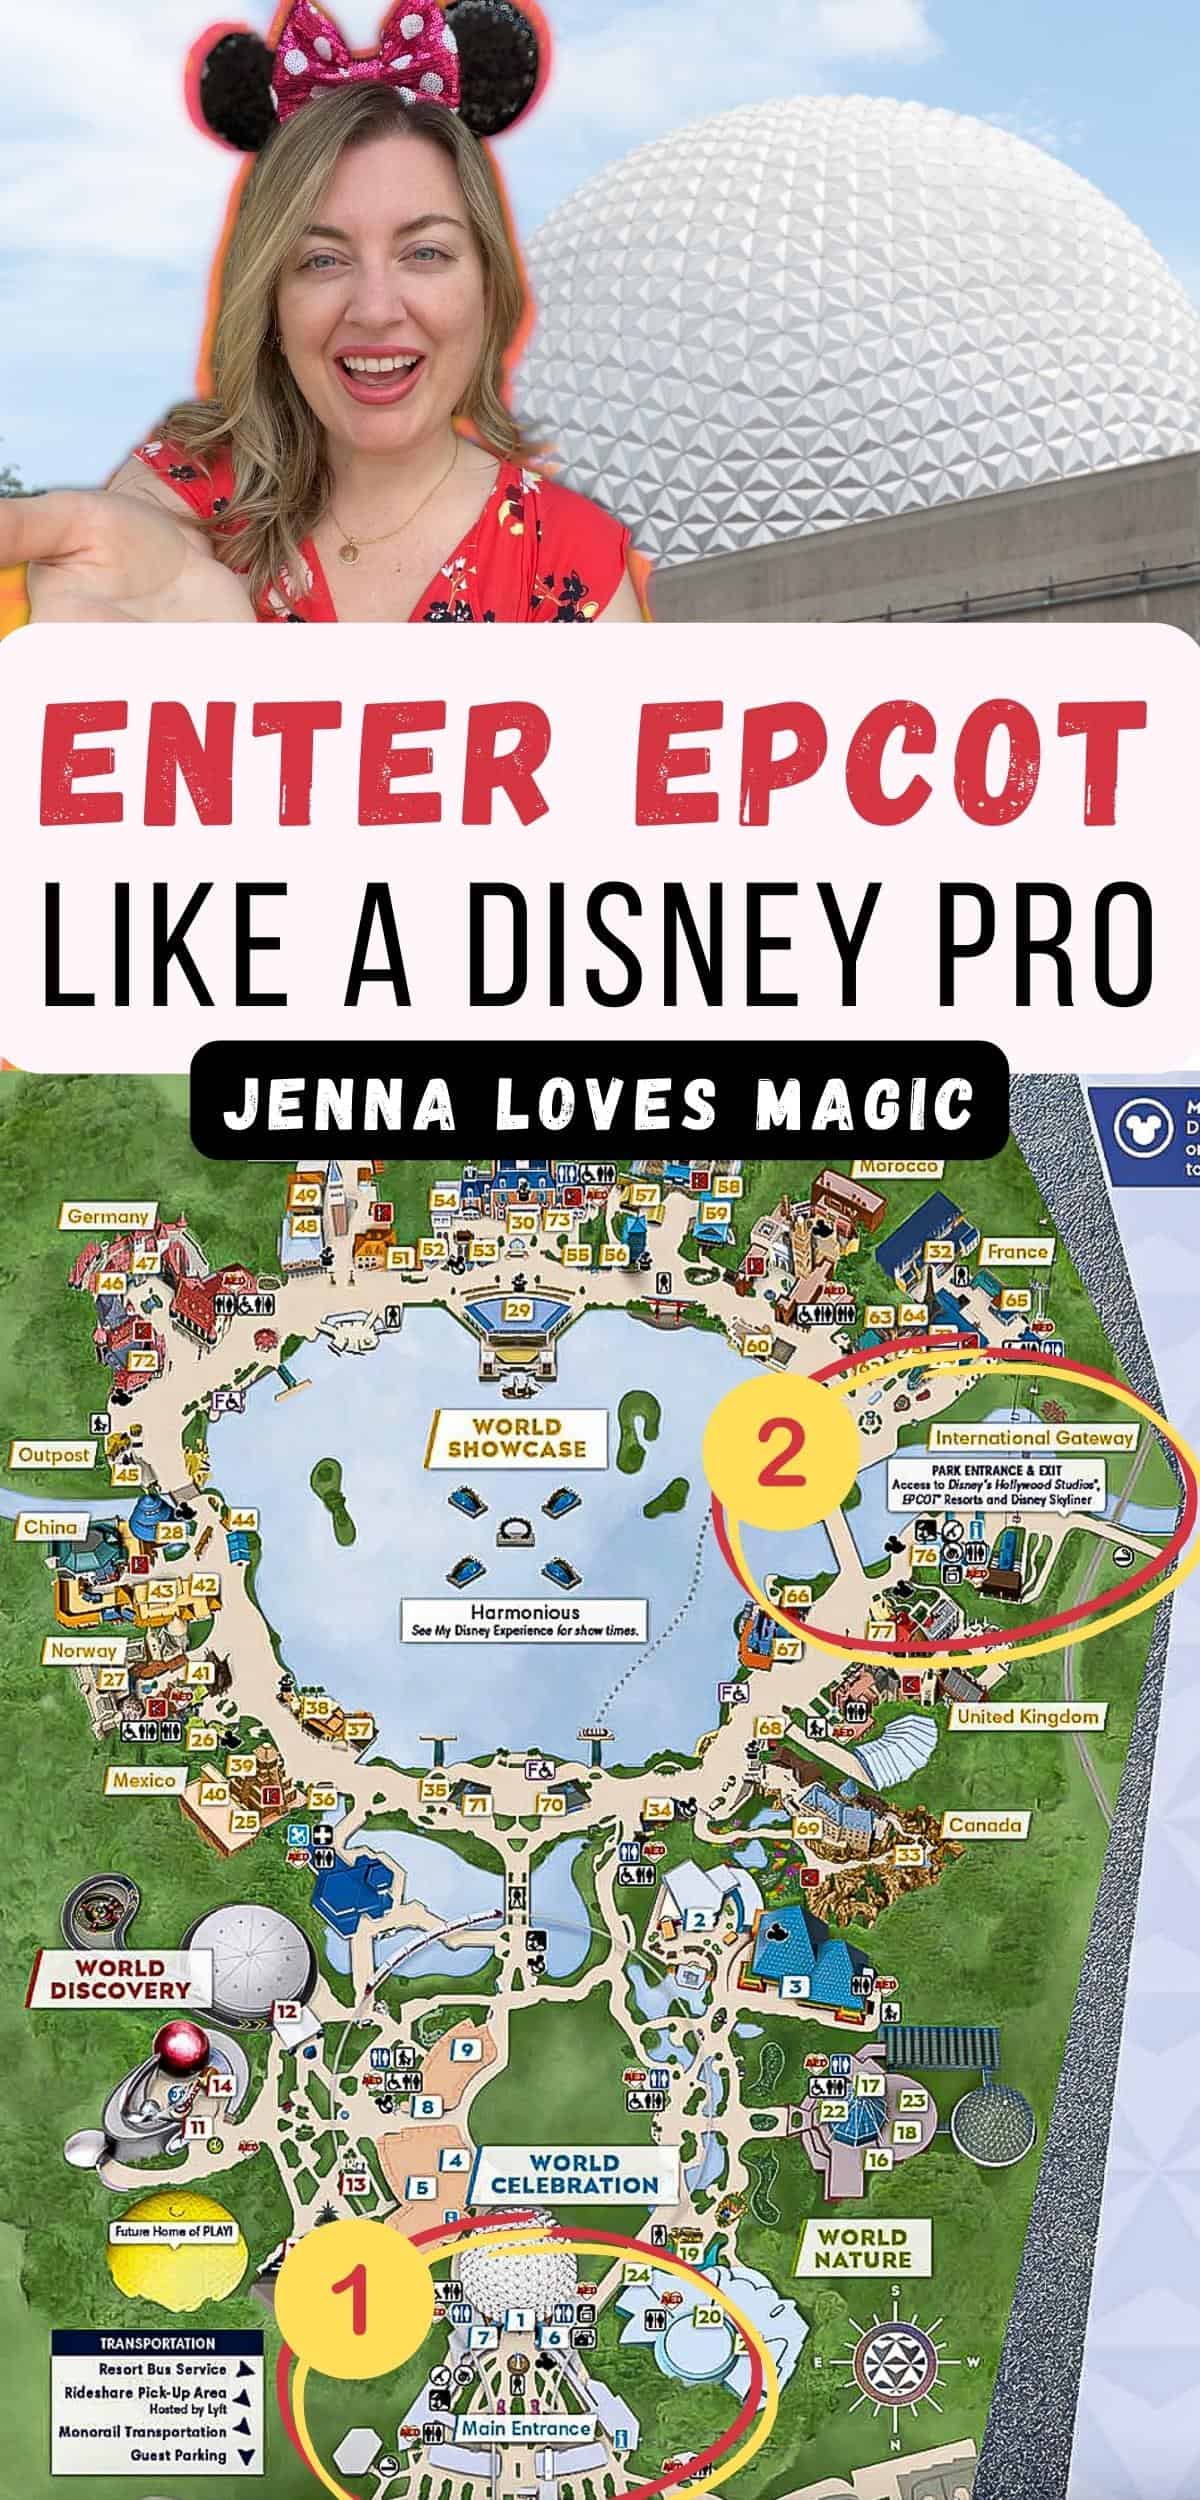 How To Enter Epcot Map With Entrance Points at Walt Disney World with text overlay and Jenna Loves Magic logo